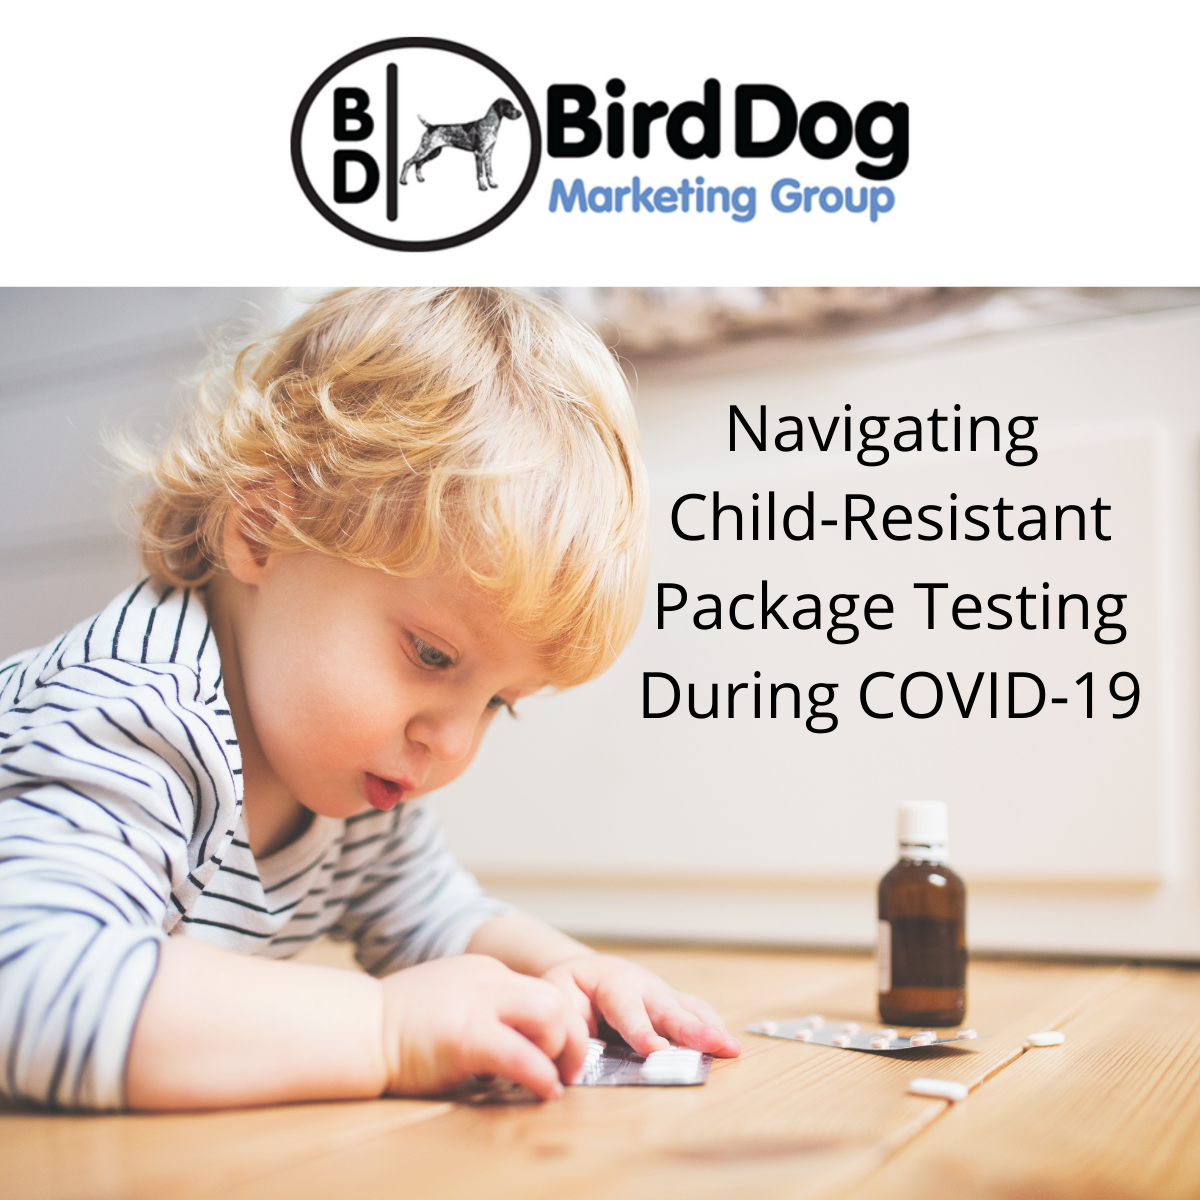 Blog Post - Navigating Child-Resistant Package Testing During Covid-19